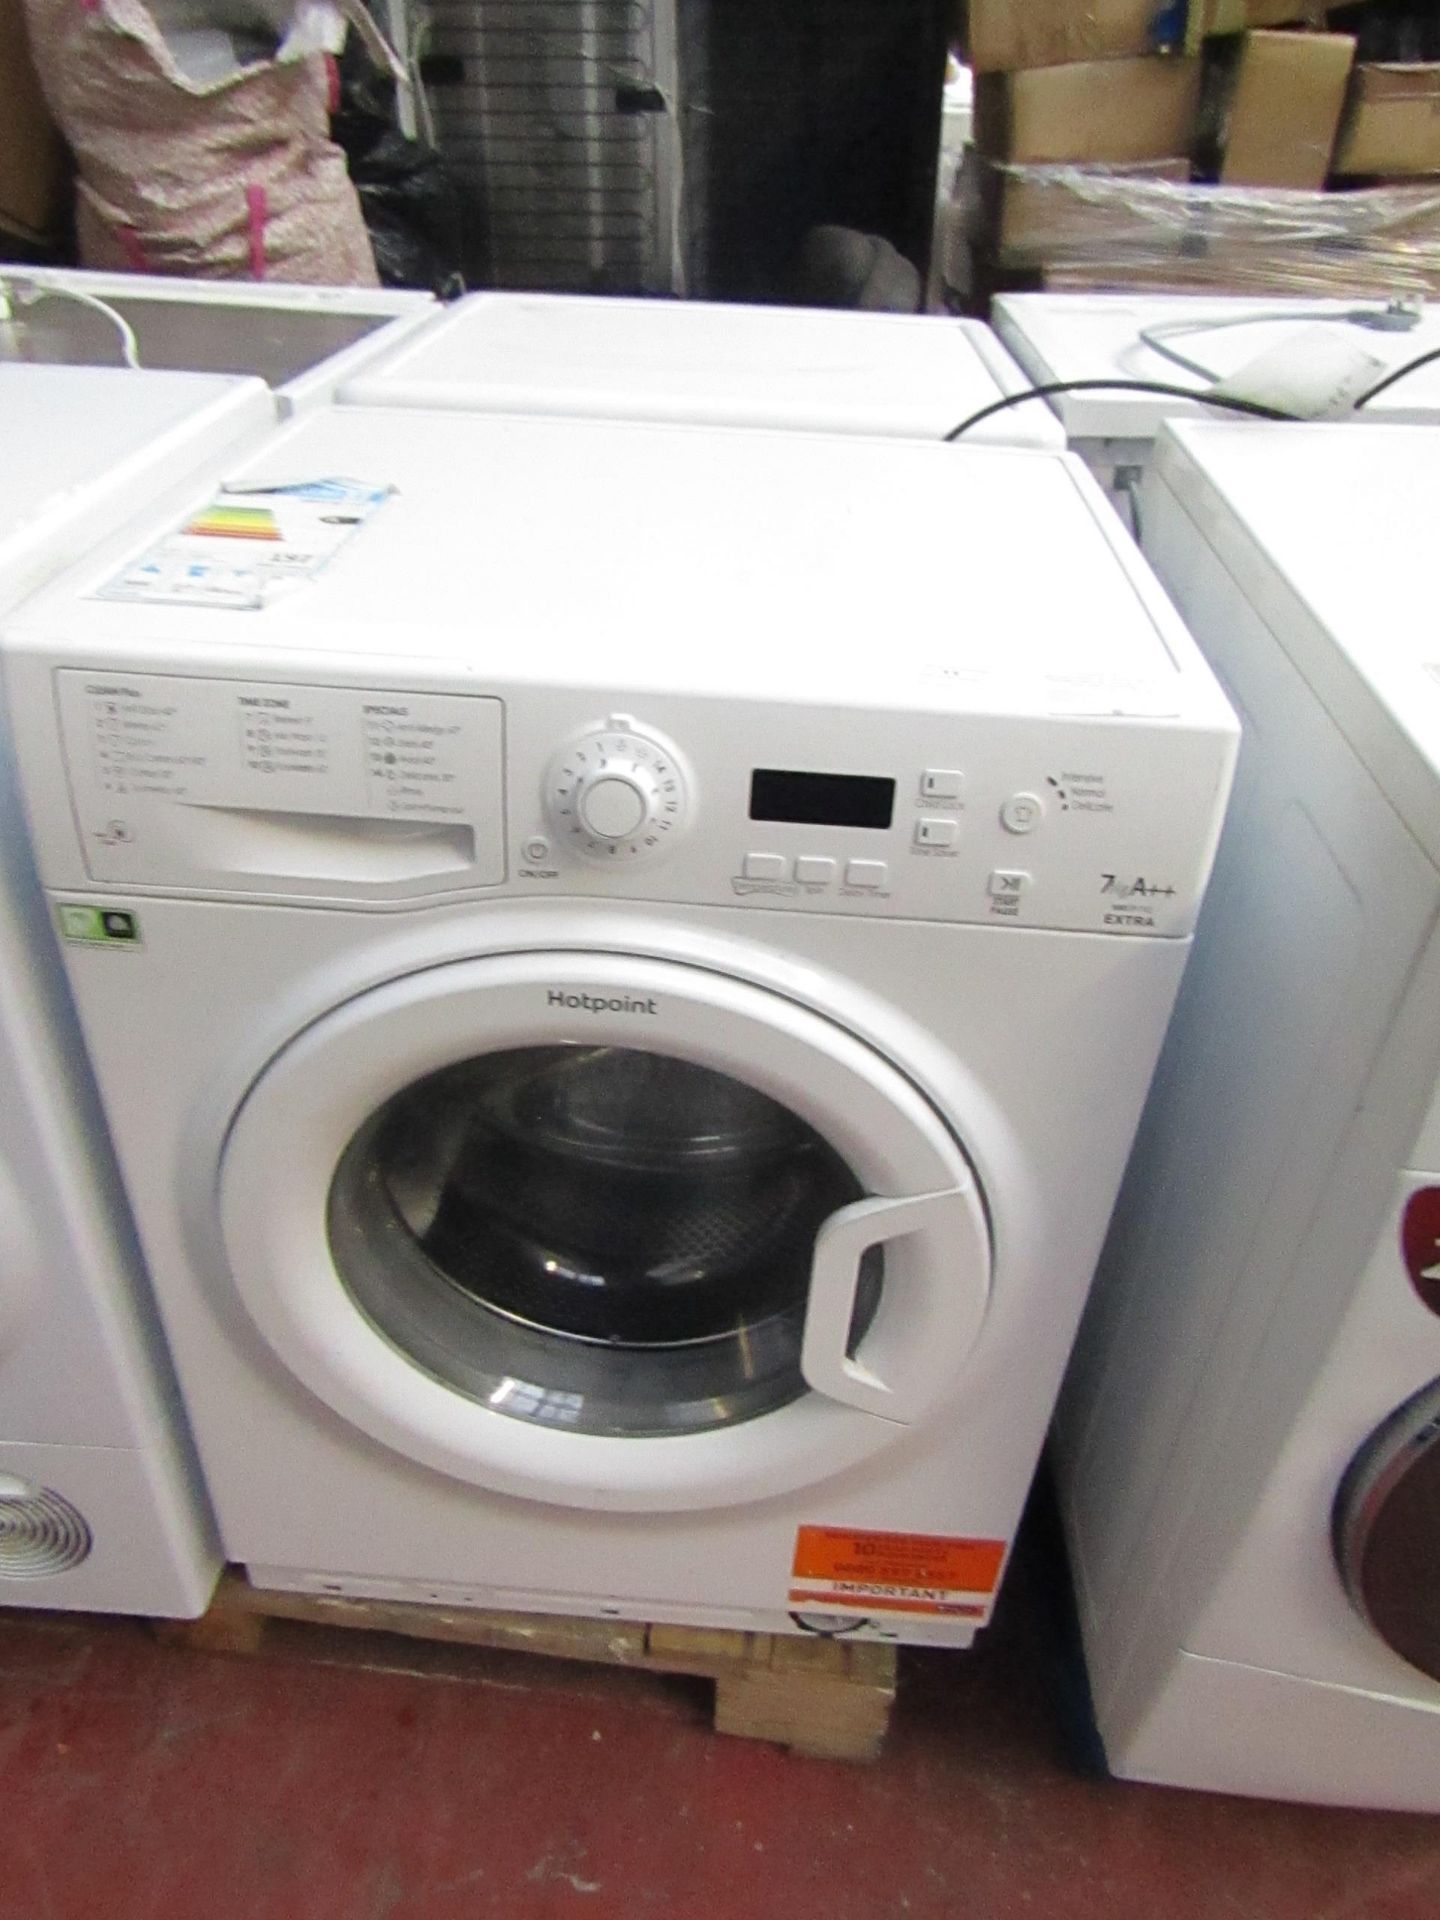 Hotpoint 7KG washing Machine, powers on and spins